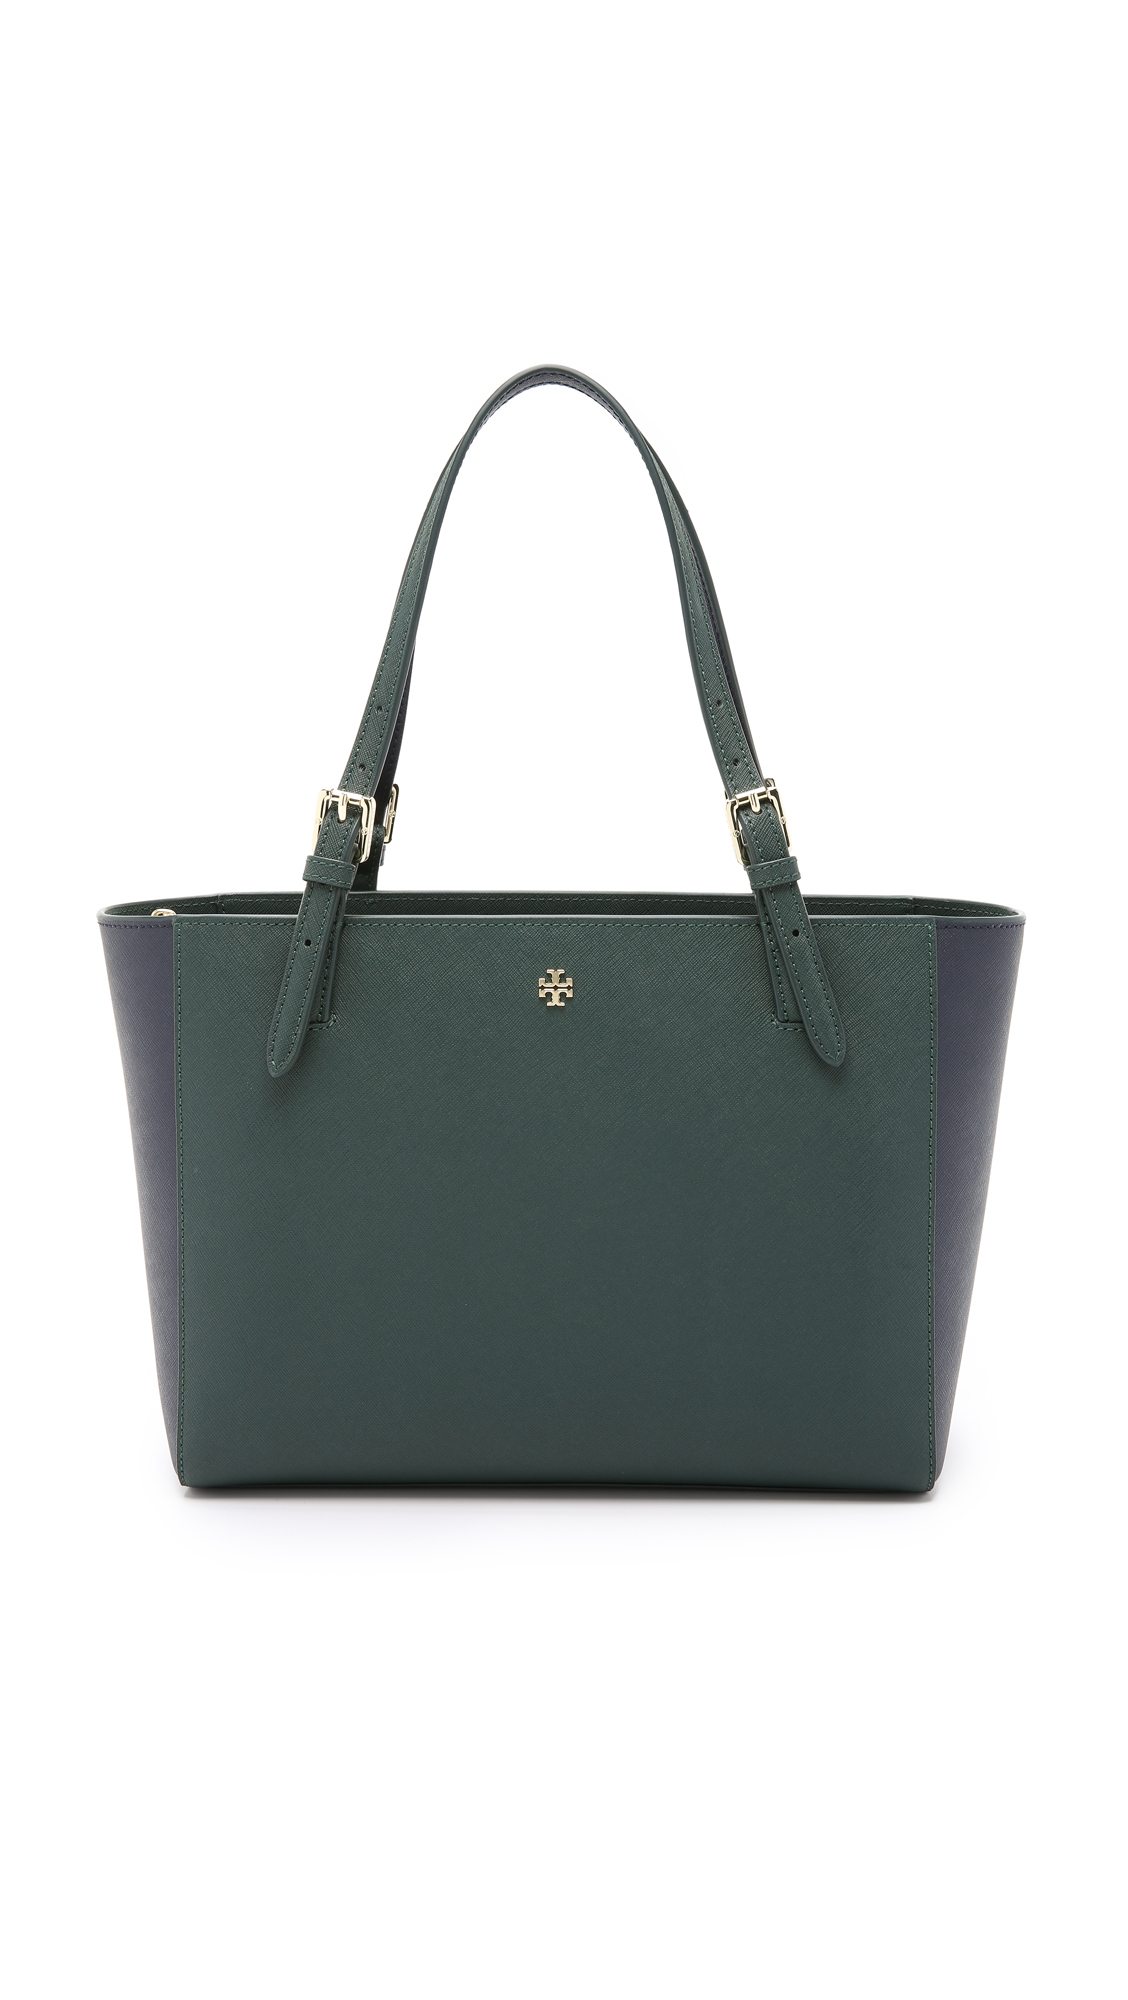 Tory Burch, Bags, Tory Burch Emerson Large Buckle Tote